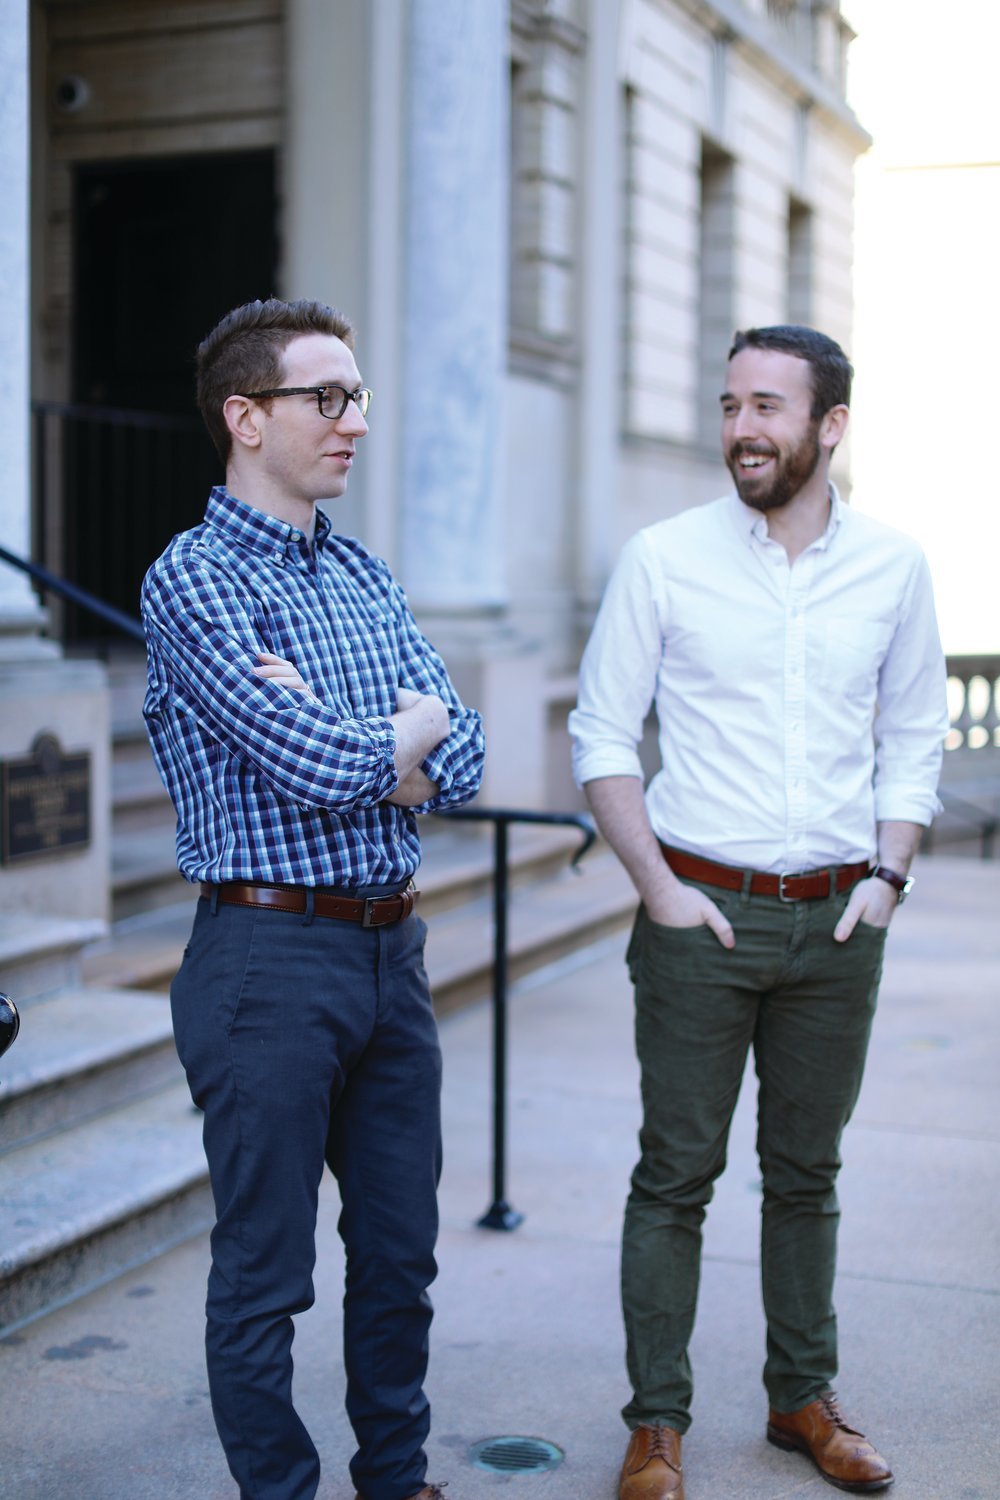 John Clarke, left, and Scott Thompson, 28, are the co-owners of the Catholic publishing firm Cluny Media, based out of Rhode Island. The business partners formed Cluny Media a few years out of Providence College in 2015. Cluny focuses on re-publishing books in the Catholic literary and intellectual traditions that have fallen out-of-print with the large publishers.